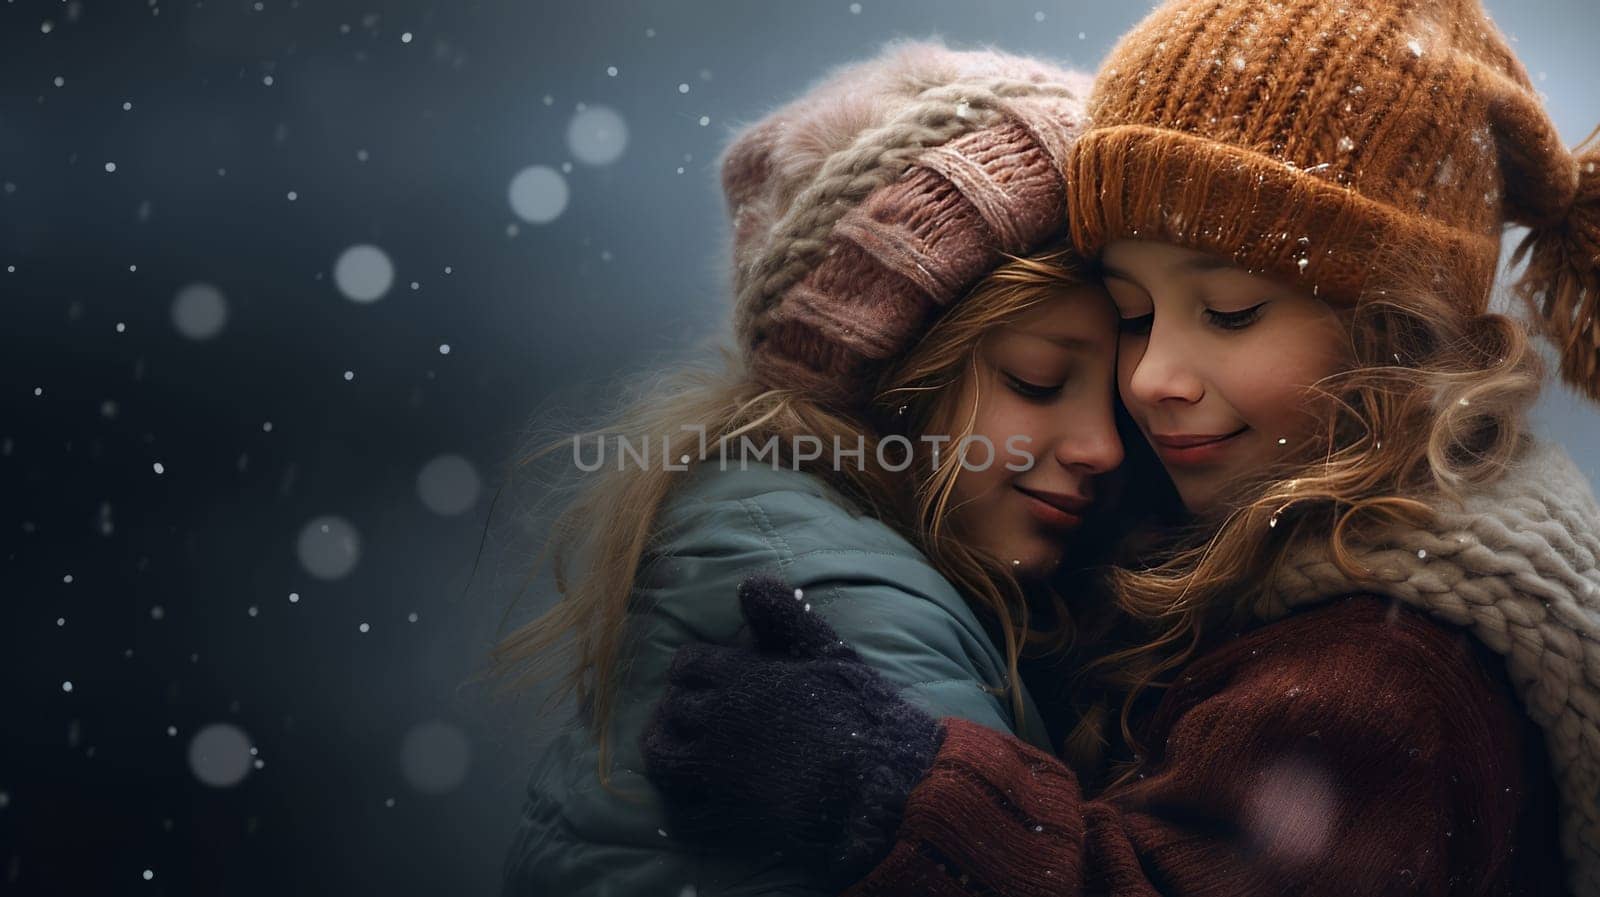 A mother and child share a loving hug in the snow, expressing the warmth and joy of family during Christmas and New Year holidays. by DogDrawHand